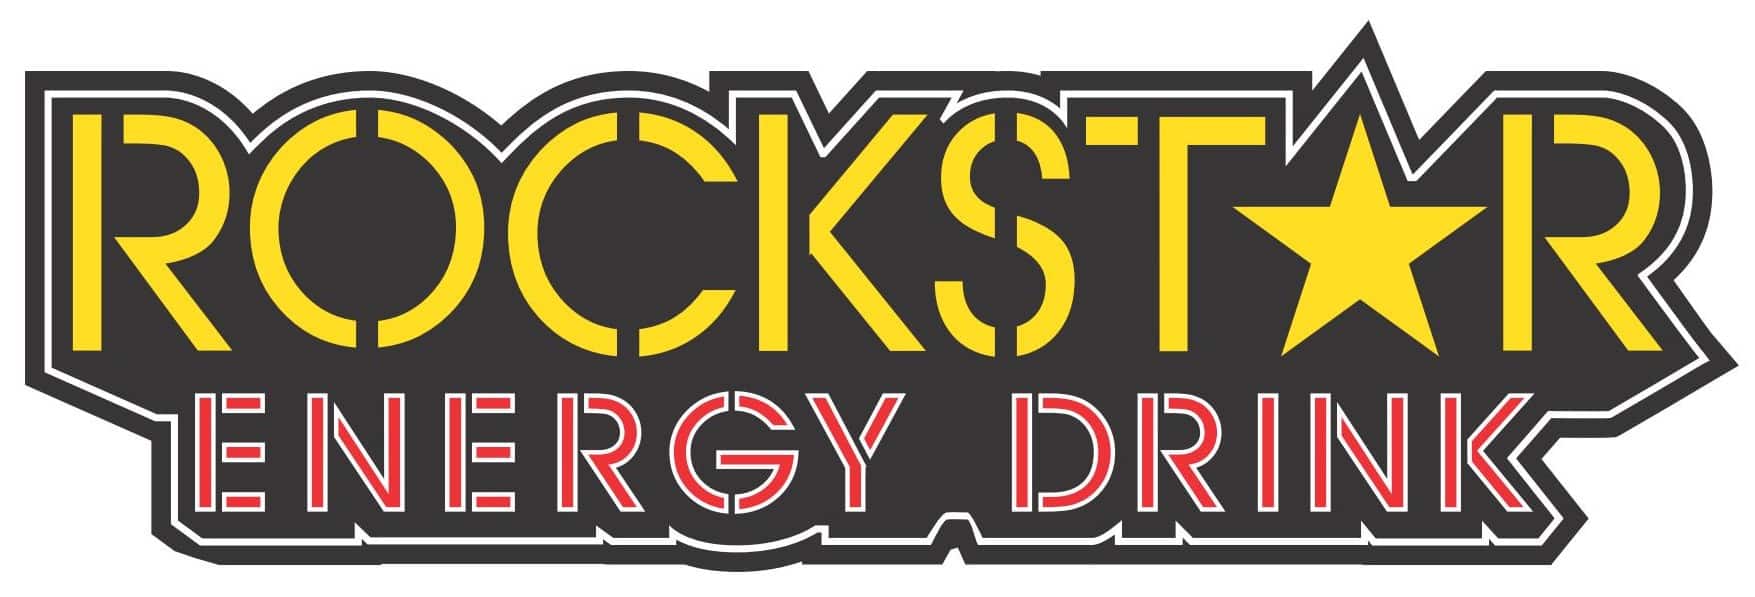 Download this Rockstar Energy Drink... picture